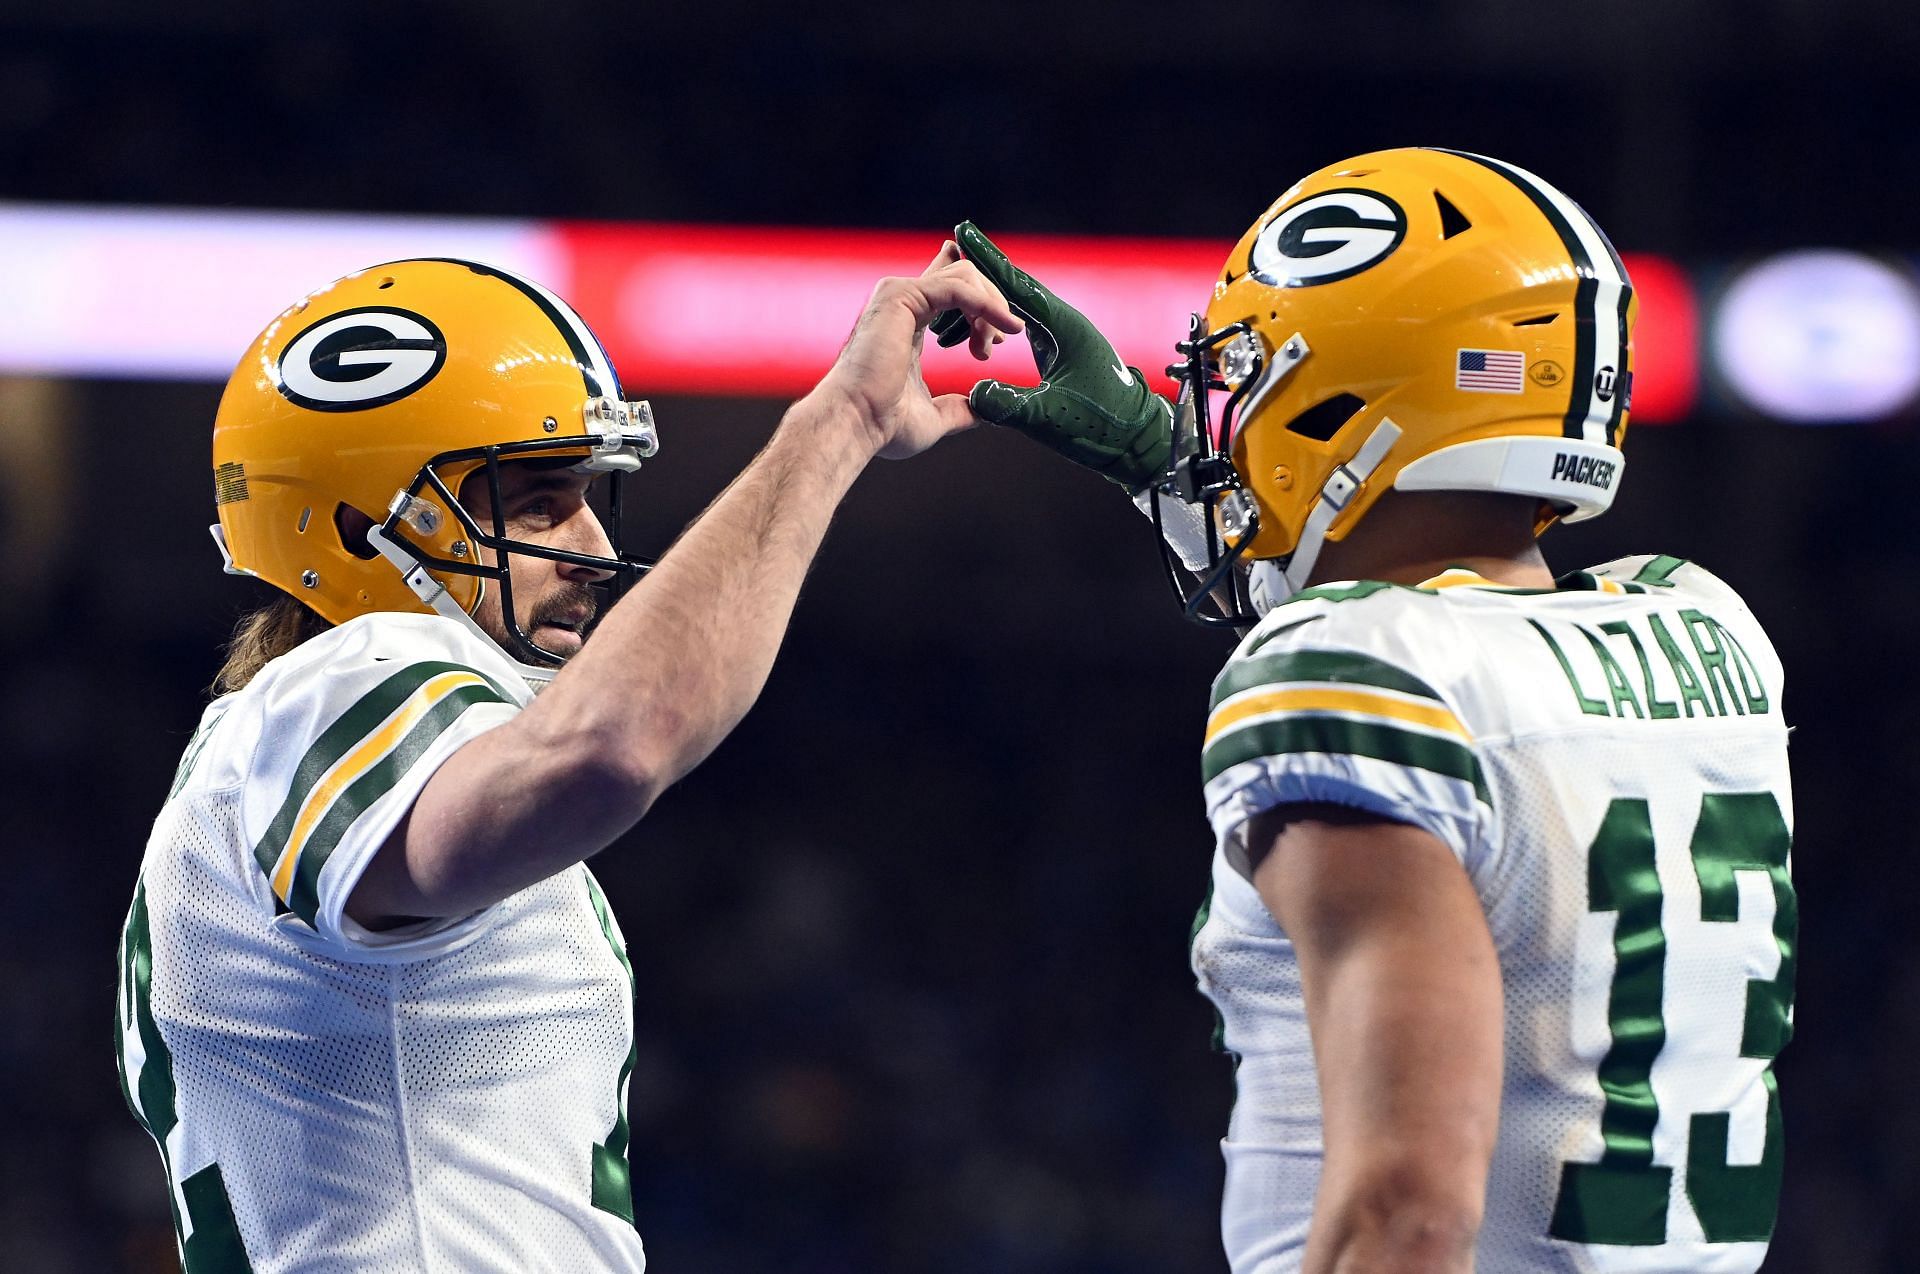 Aaron Rodgers and Allen Lazard celebrate a touchdown